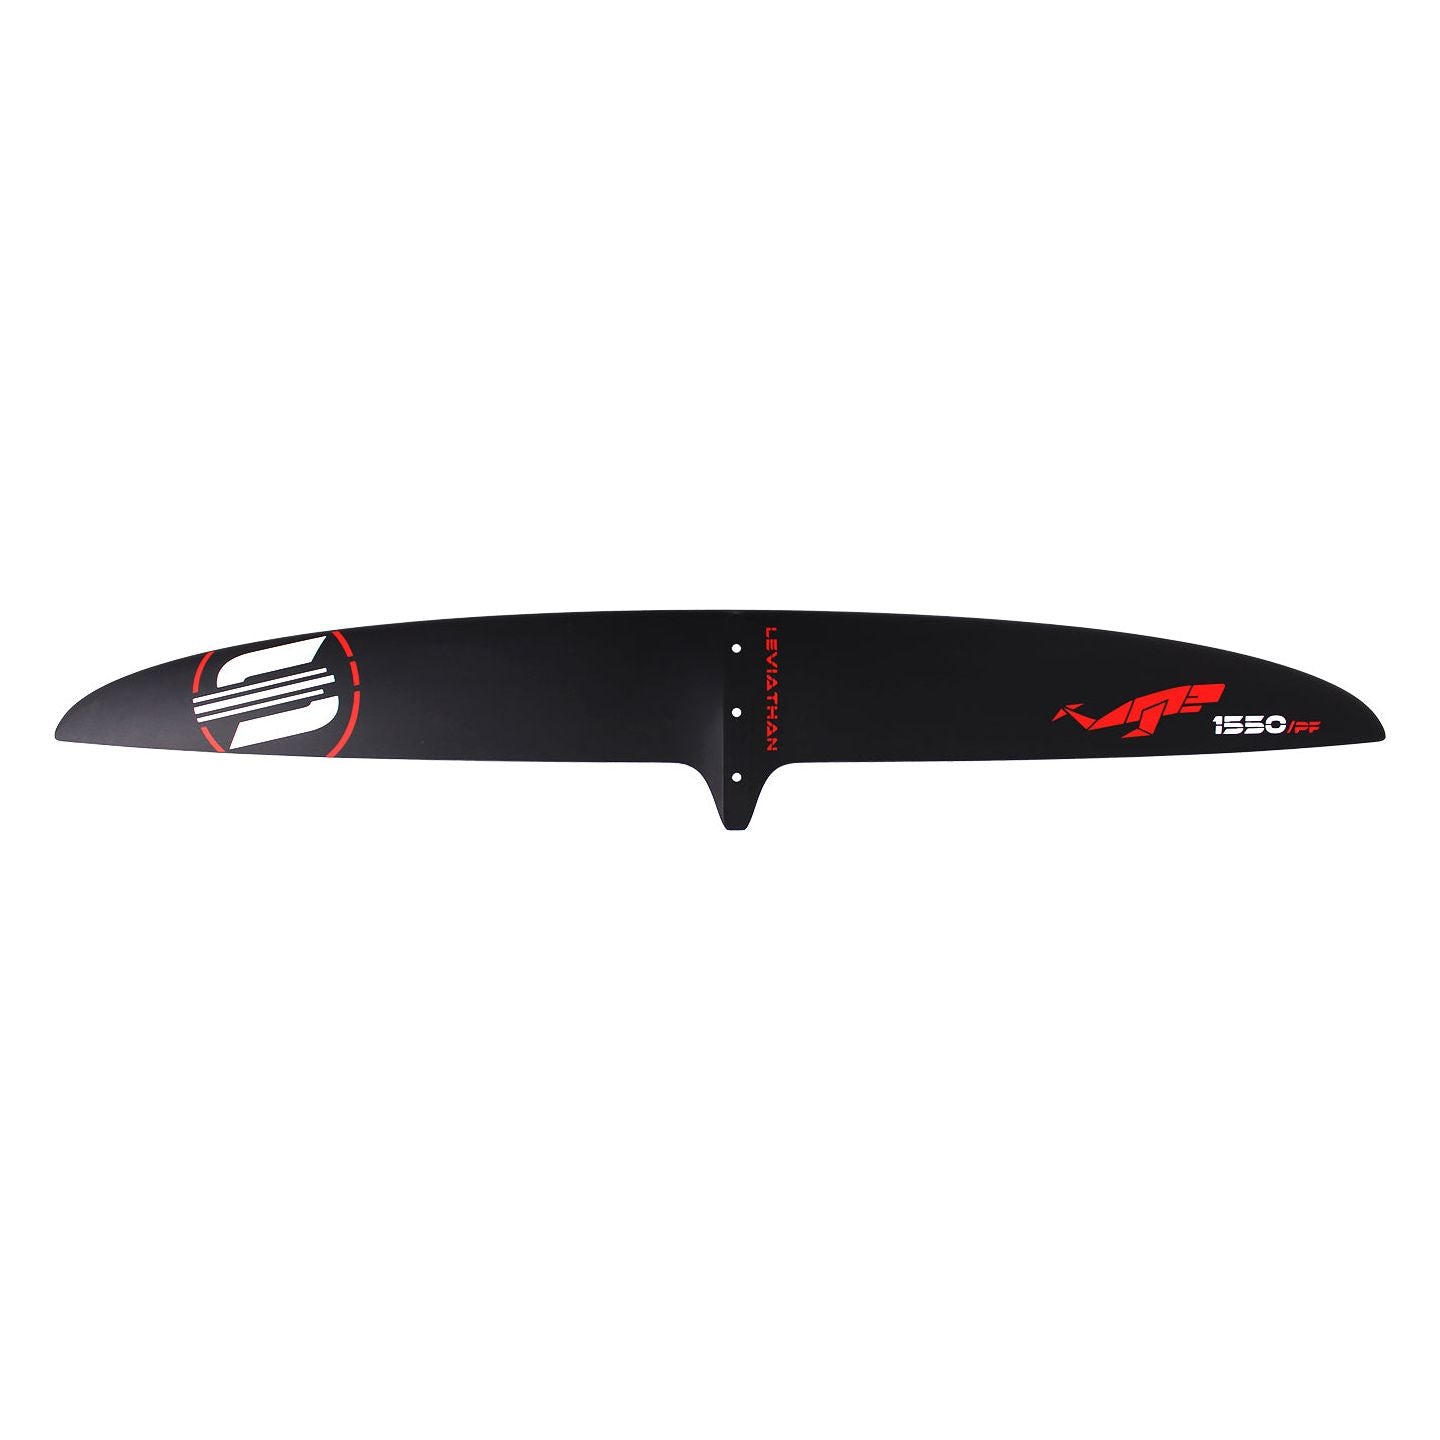 Sabfoil Leviathan 1550 Pro Finish | T8 Hydrofoil Front Wing